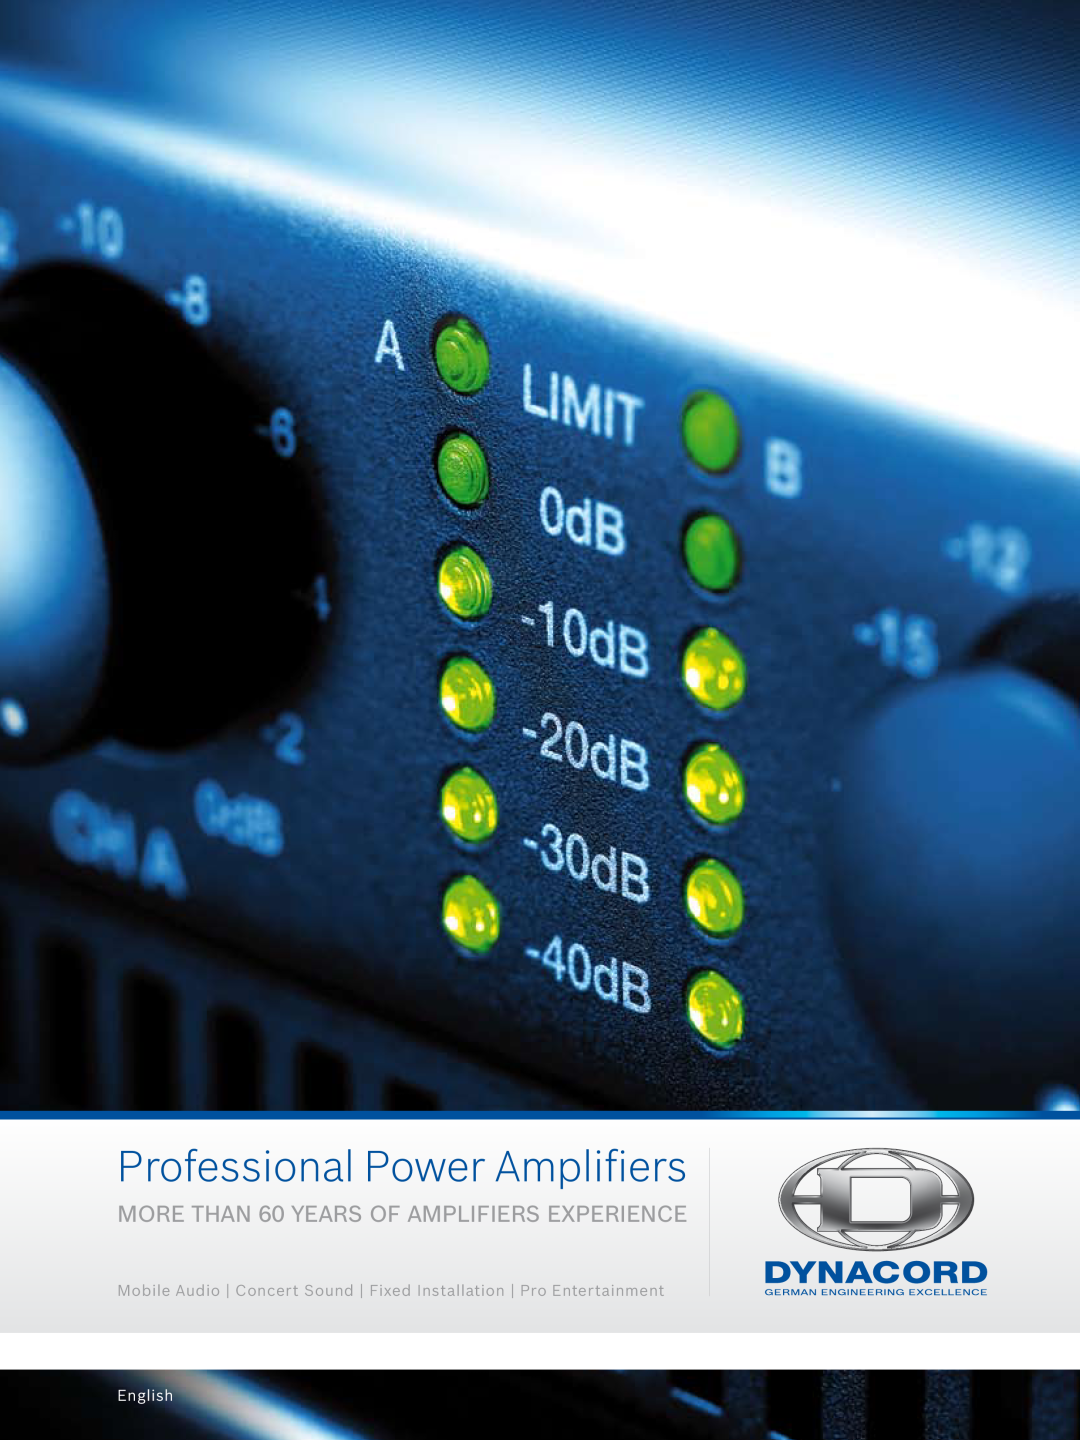 Dynacord Professional Power Amplifiers manual more than 60 years of amplifiers experience 